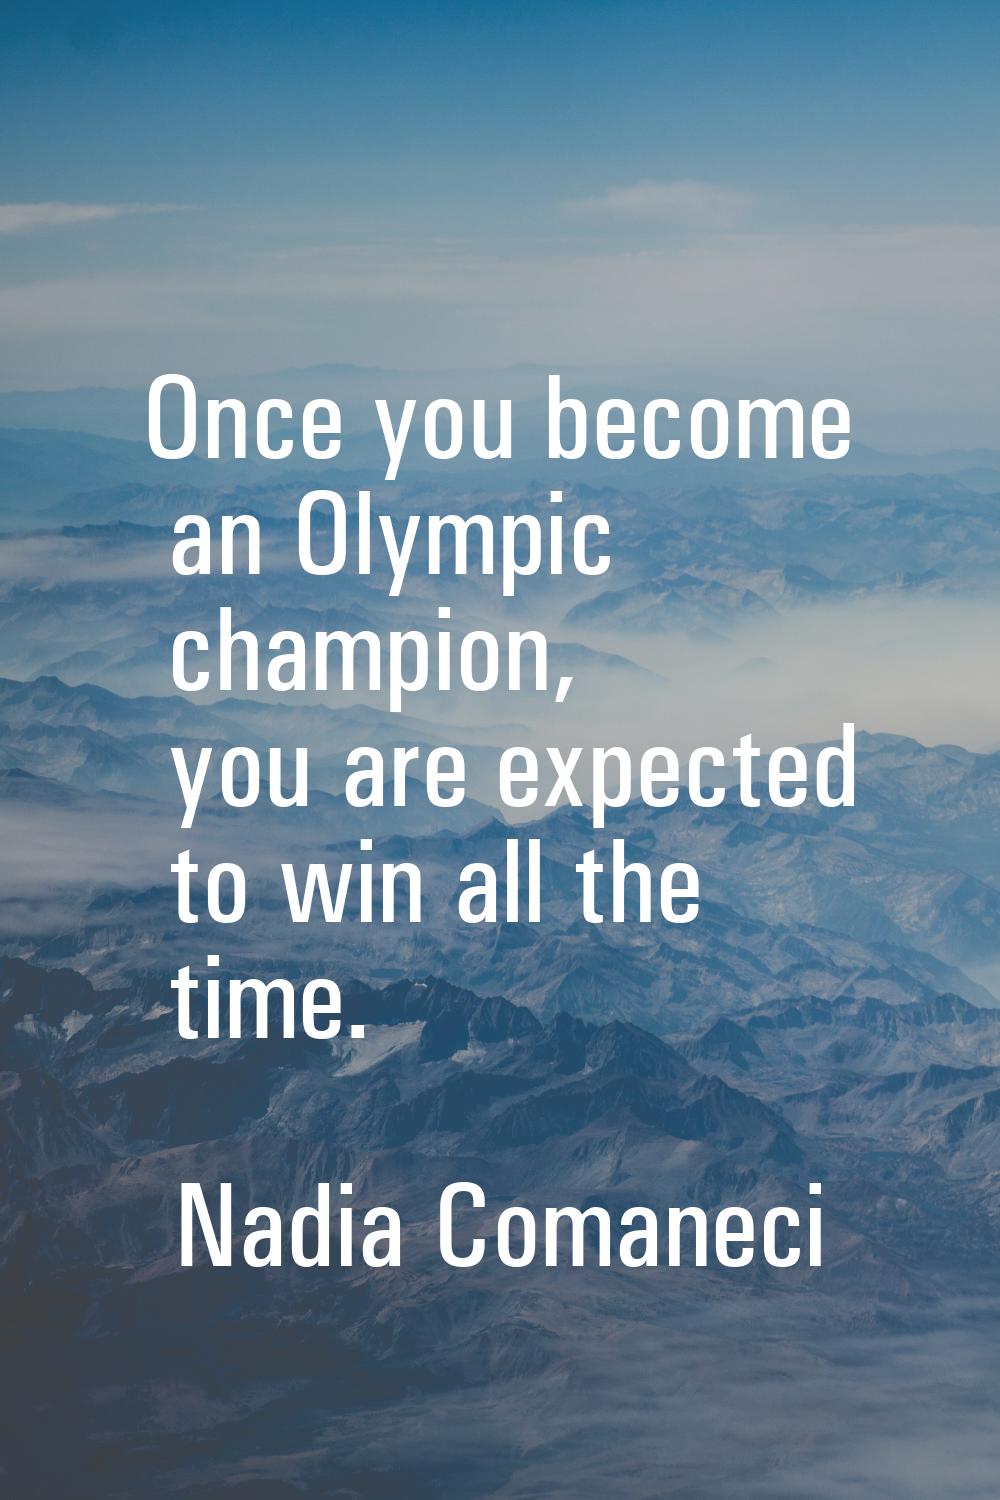 Once you become an Olympic champion, you are expected to win all the time.